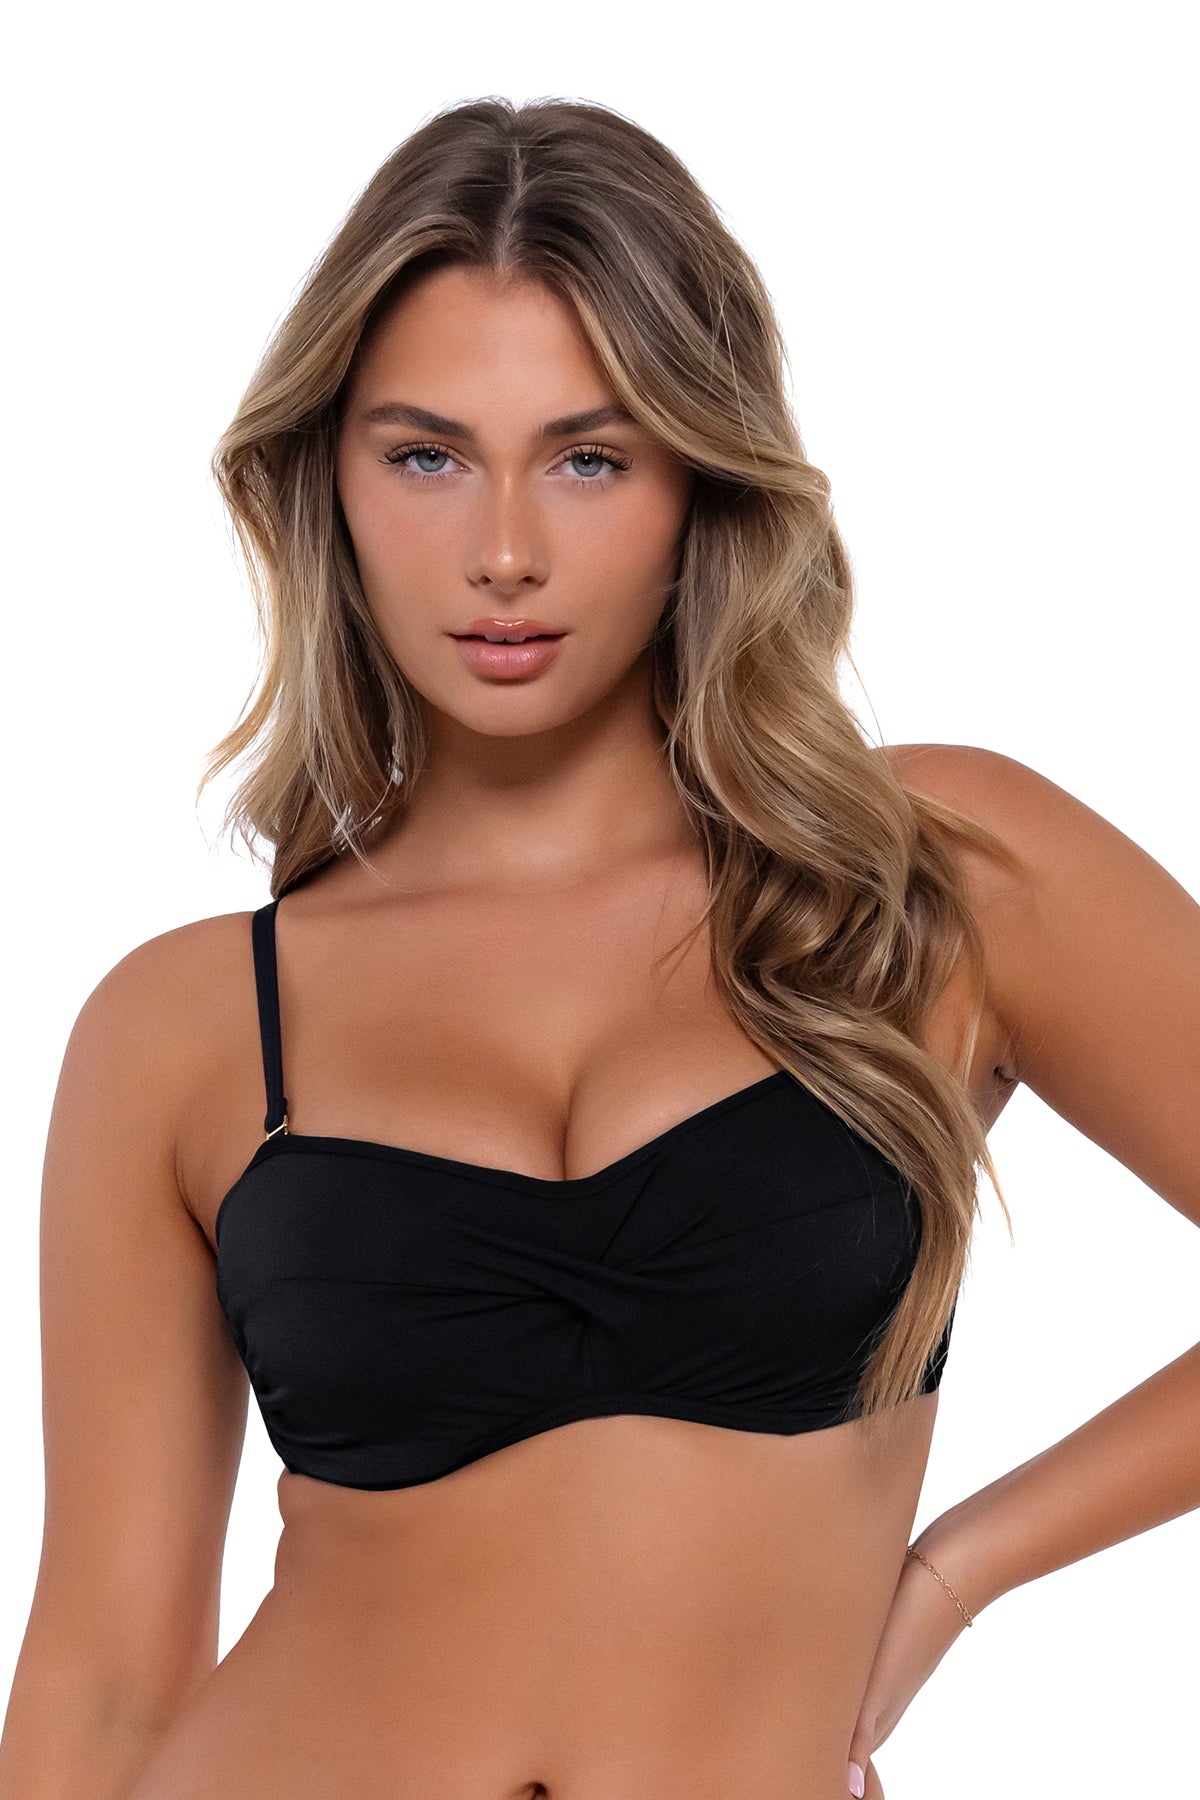 Front pose #1 of Taylor wearing Sunsets Black Iconic Twist Bandeau Top